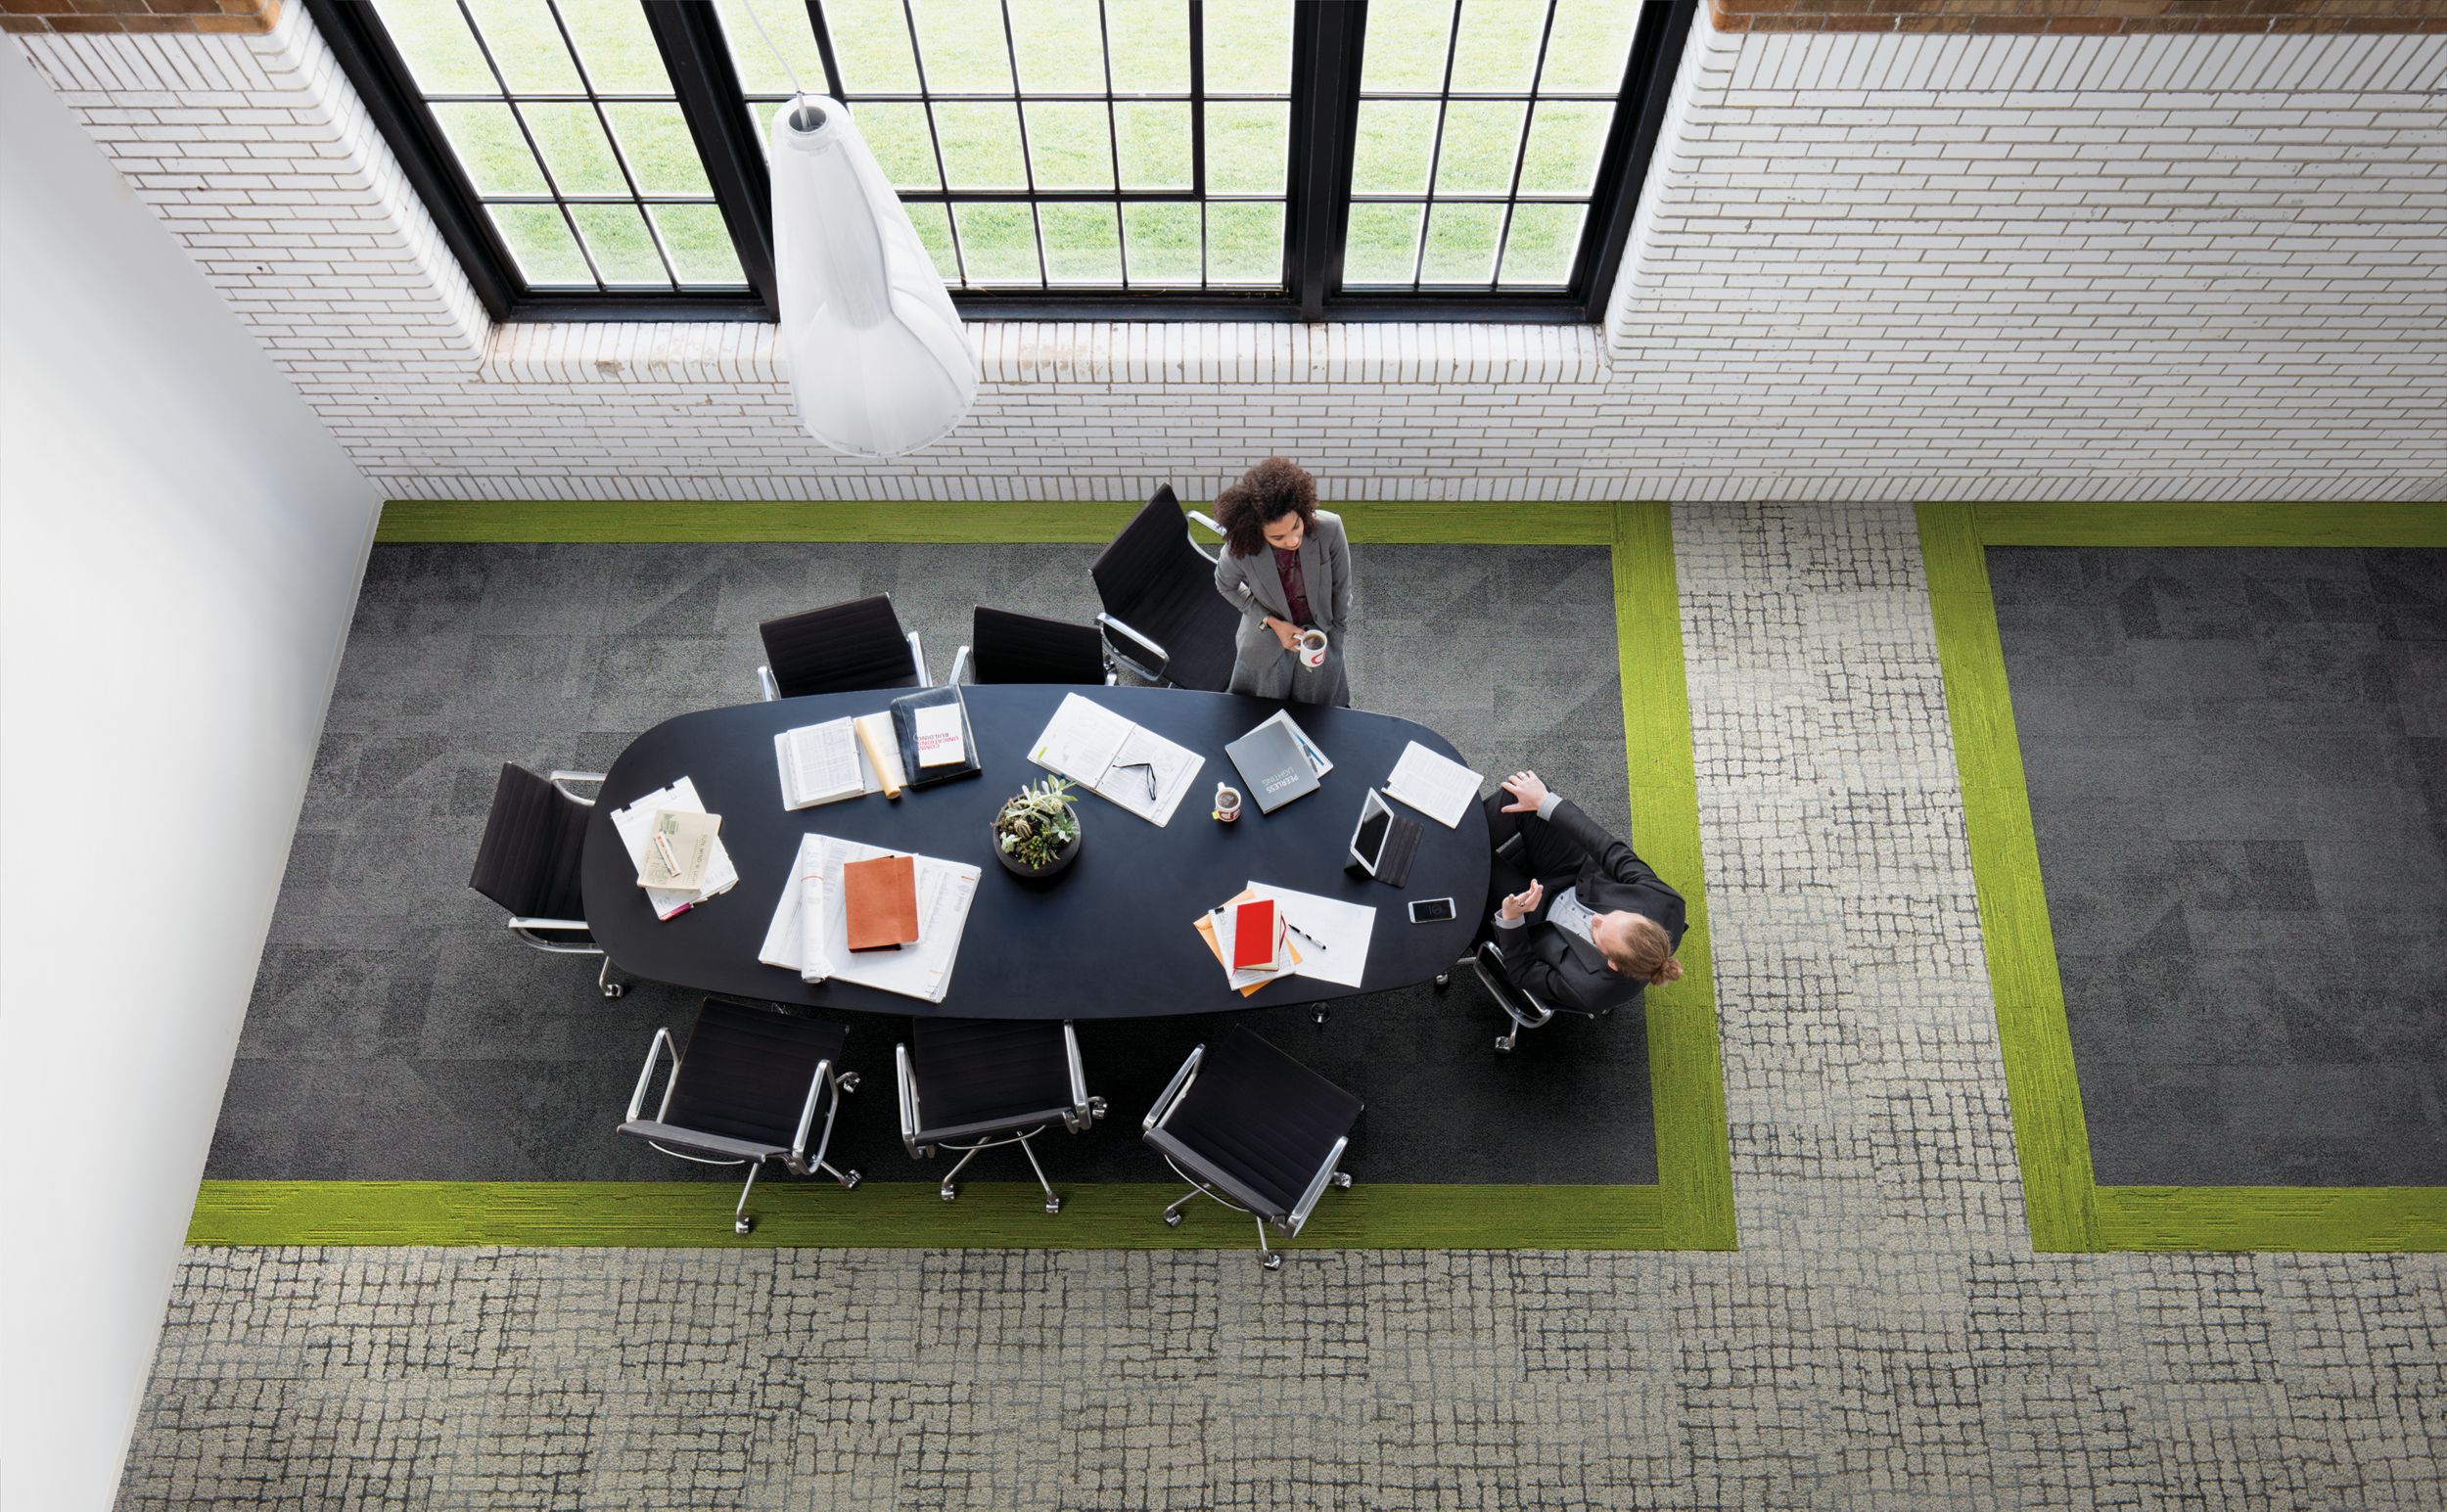 Interface Paver and Sett in Stone carpet tile with UR501 plank carpet tile in overhead view of meeting area with man and women conversating image number 6